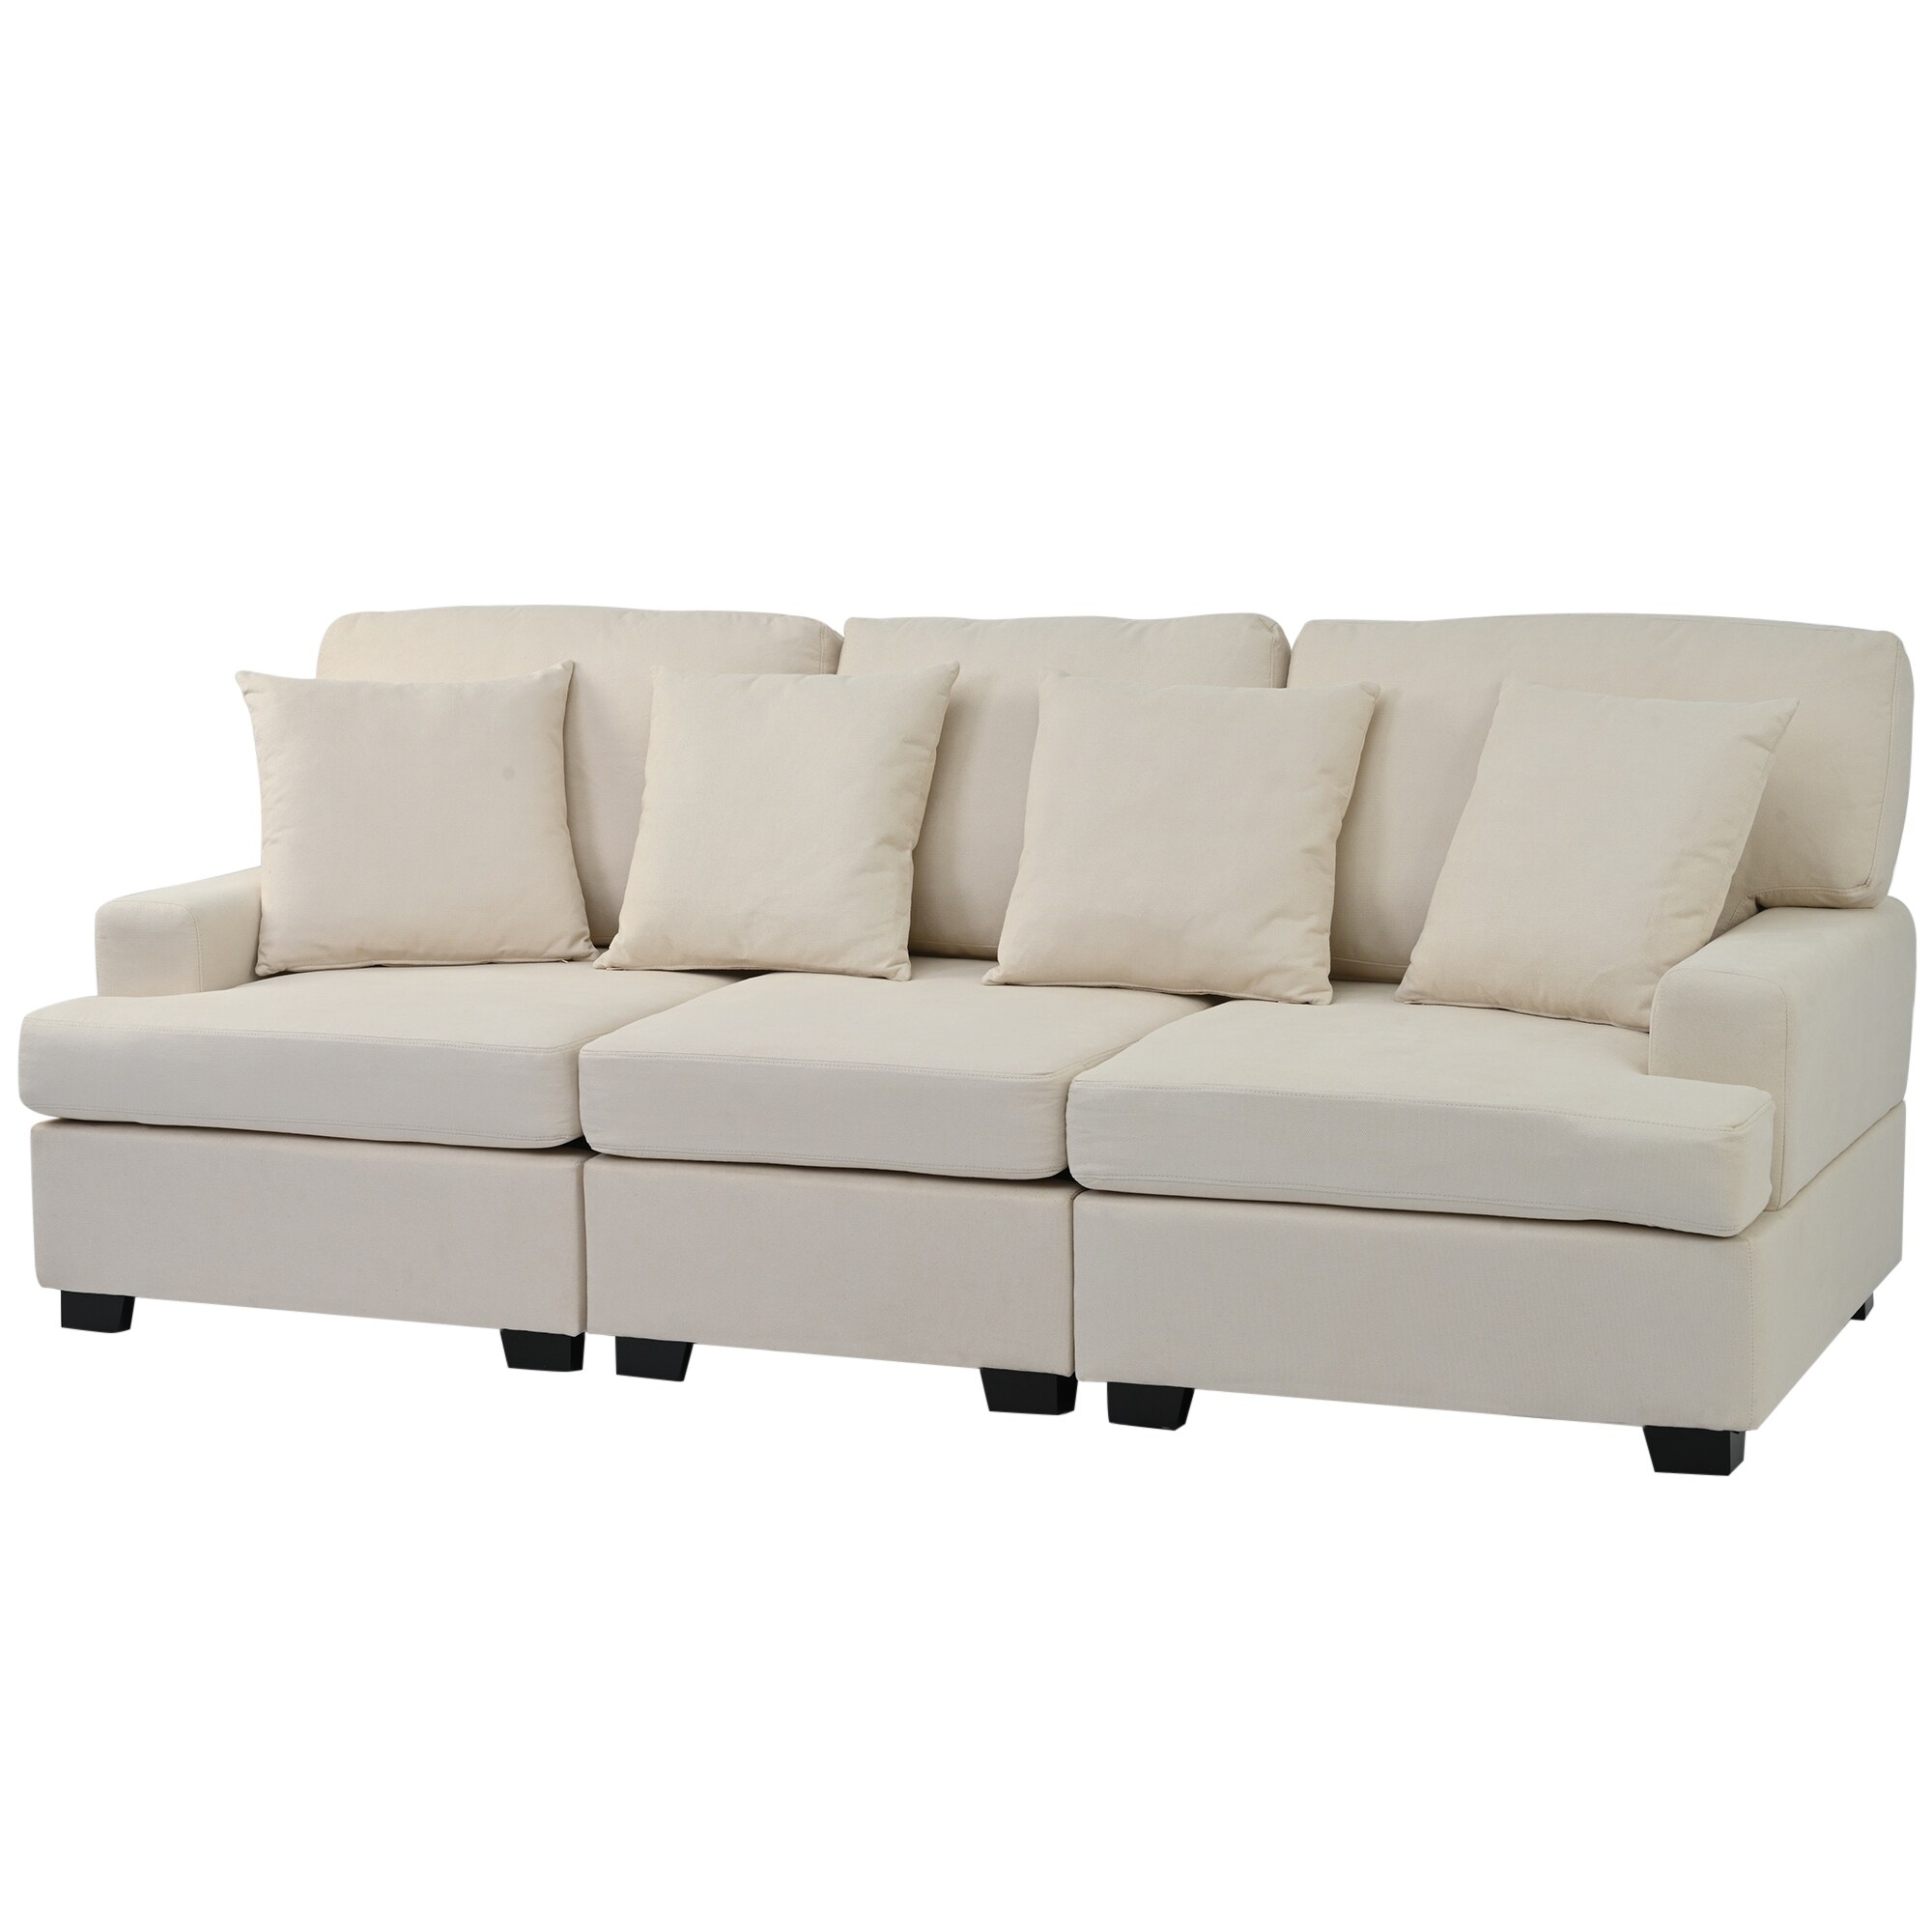 https://ak1.ostkcdn.com/images/products/is/images/direct/2c32650c2f7402f7c440f29907c23d7b71934bd1/3-Seat-Sofa-With-Removable-Back-And-Seat-Cushions-And-4-Pillows.jpg